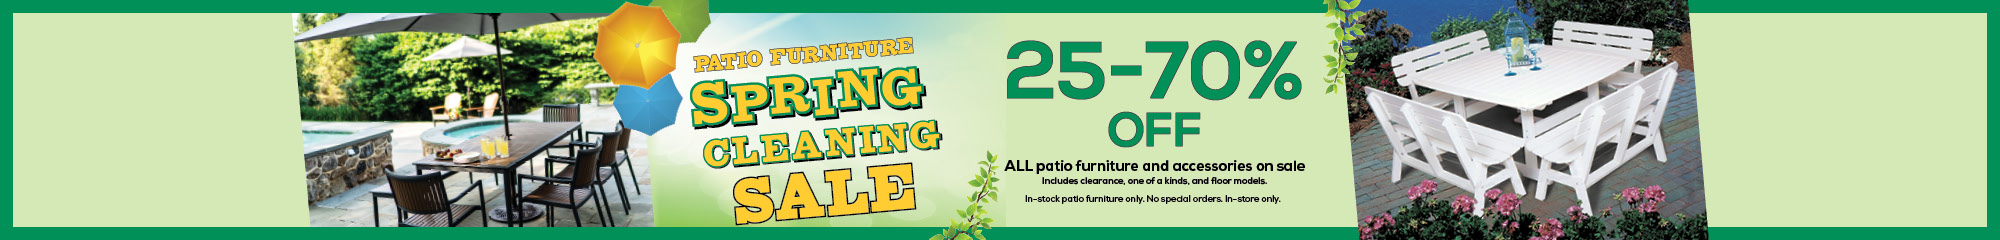 Patio Furniture Spring Cleaning Sale 25-70% Off All Patio furniture and accessories on sale. 